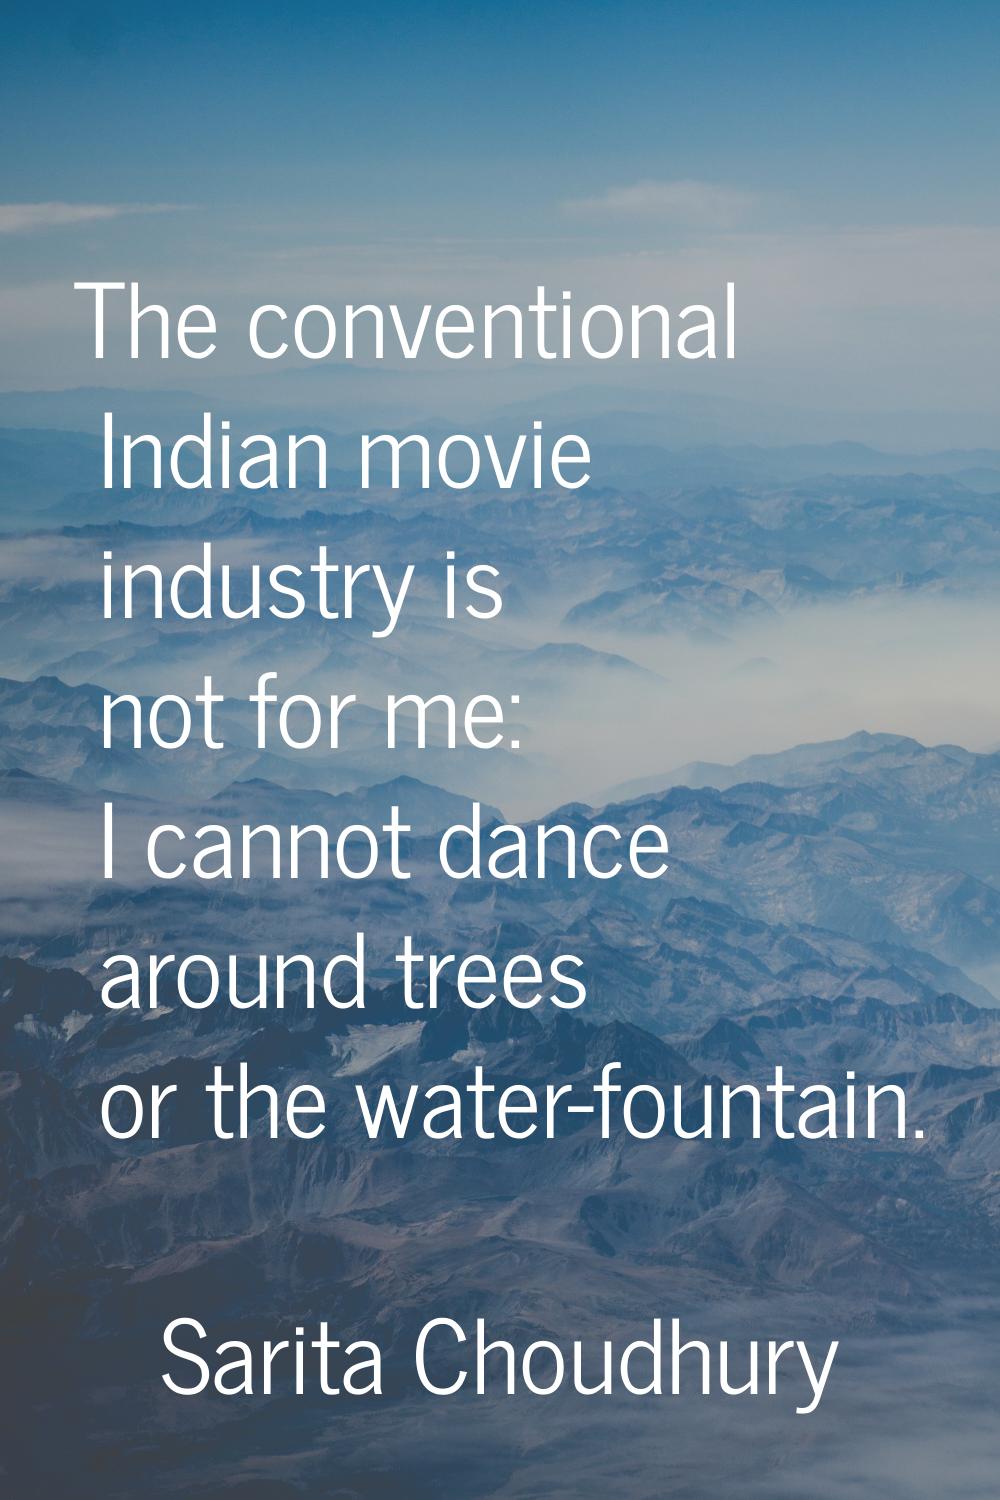 The conventional Indian movie industry is not for me: I cannot dance around trees or the water-foun